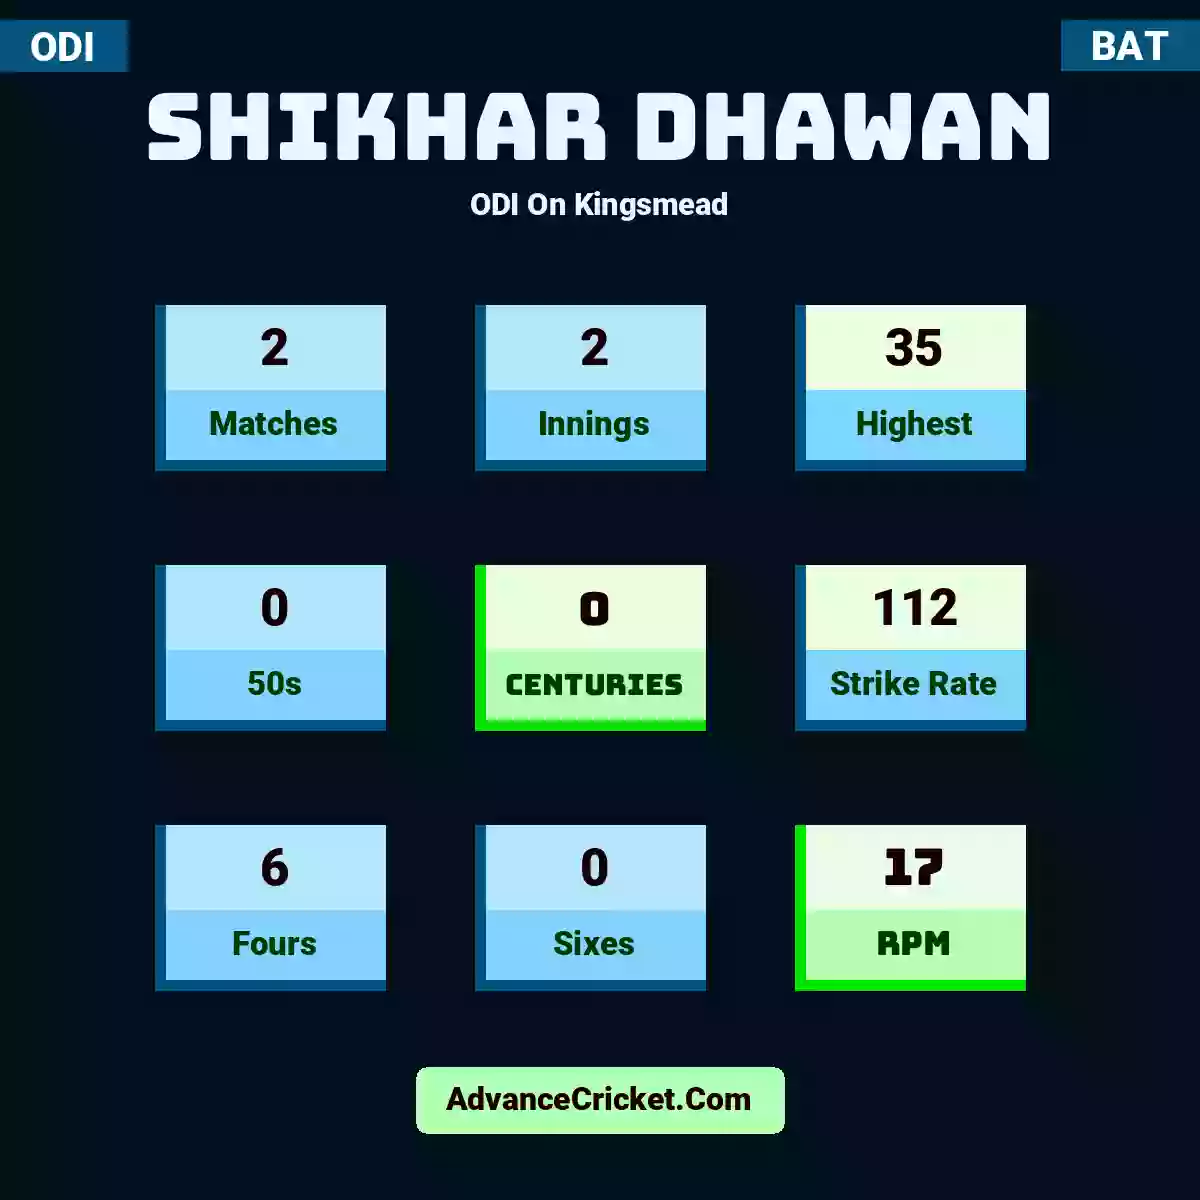 Shikhar Dhawan ODI  On Kingsmead, Shikhar Dhawan played 2 matches, scored 35 runs as highest, 0 half-centuries, and 0 centuries, with a strike rate of 112. S.Dhawan hit 6 fours and 0 sixes, with an RPM of 17.